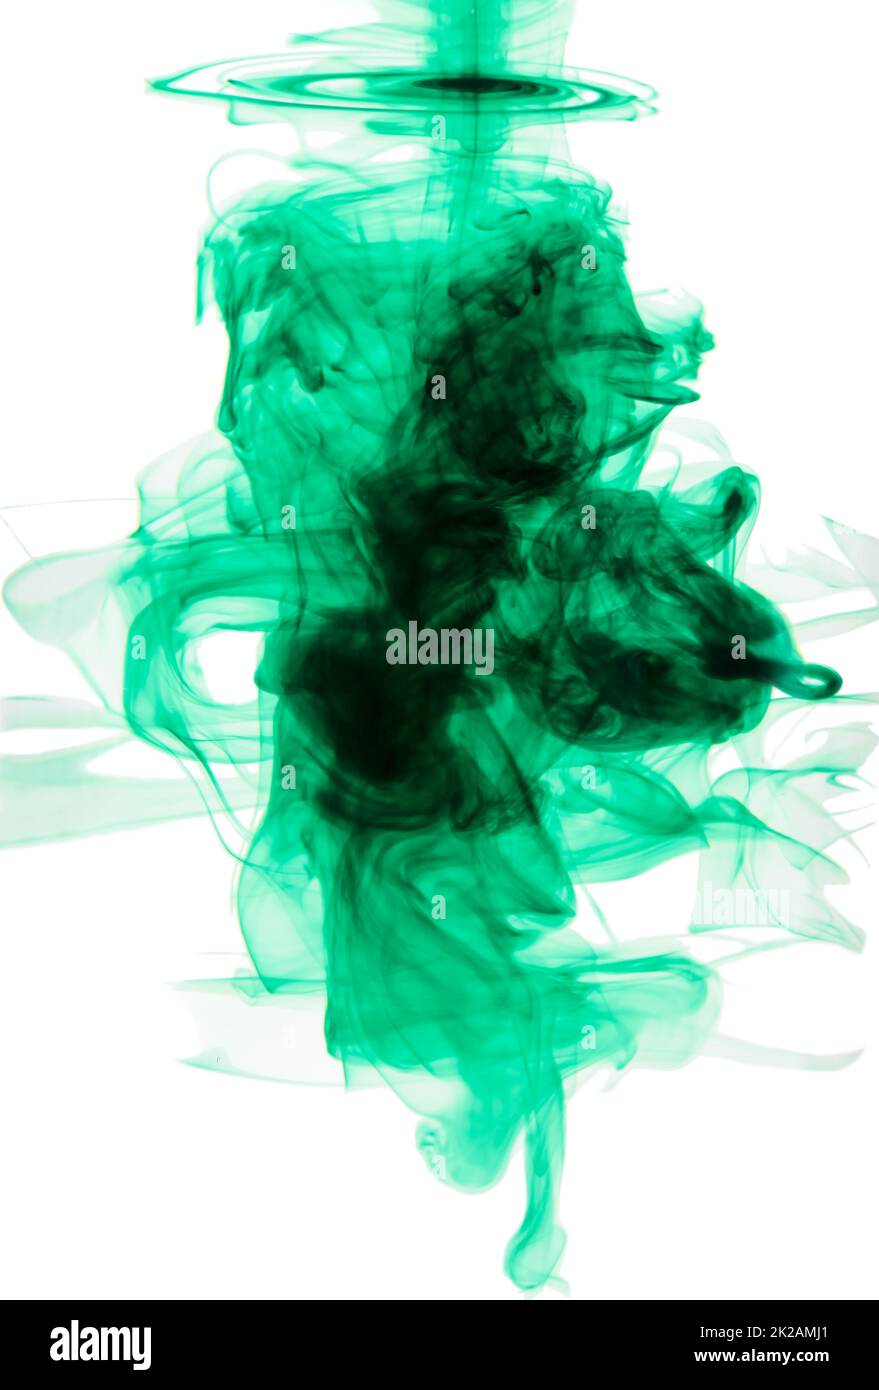 Brilliant green color explosion. Studio shot of green ink in water against a white background. Stock Photo